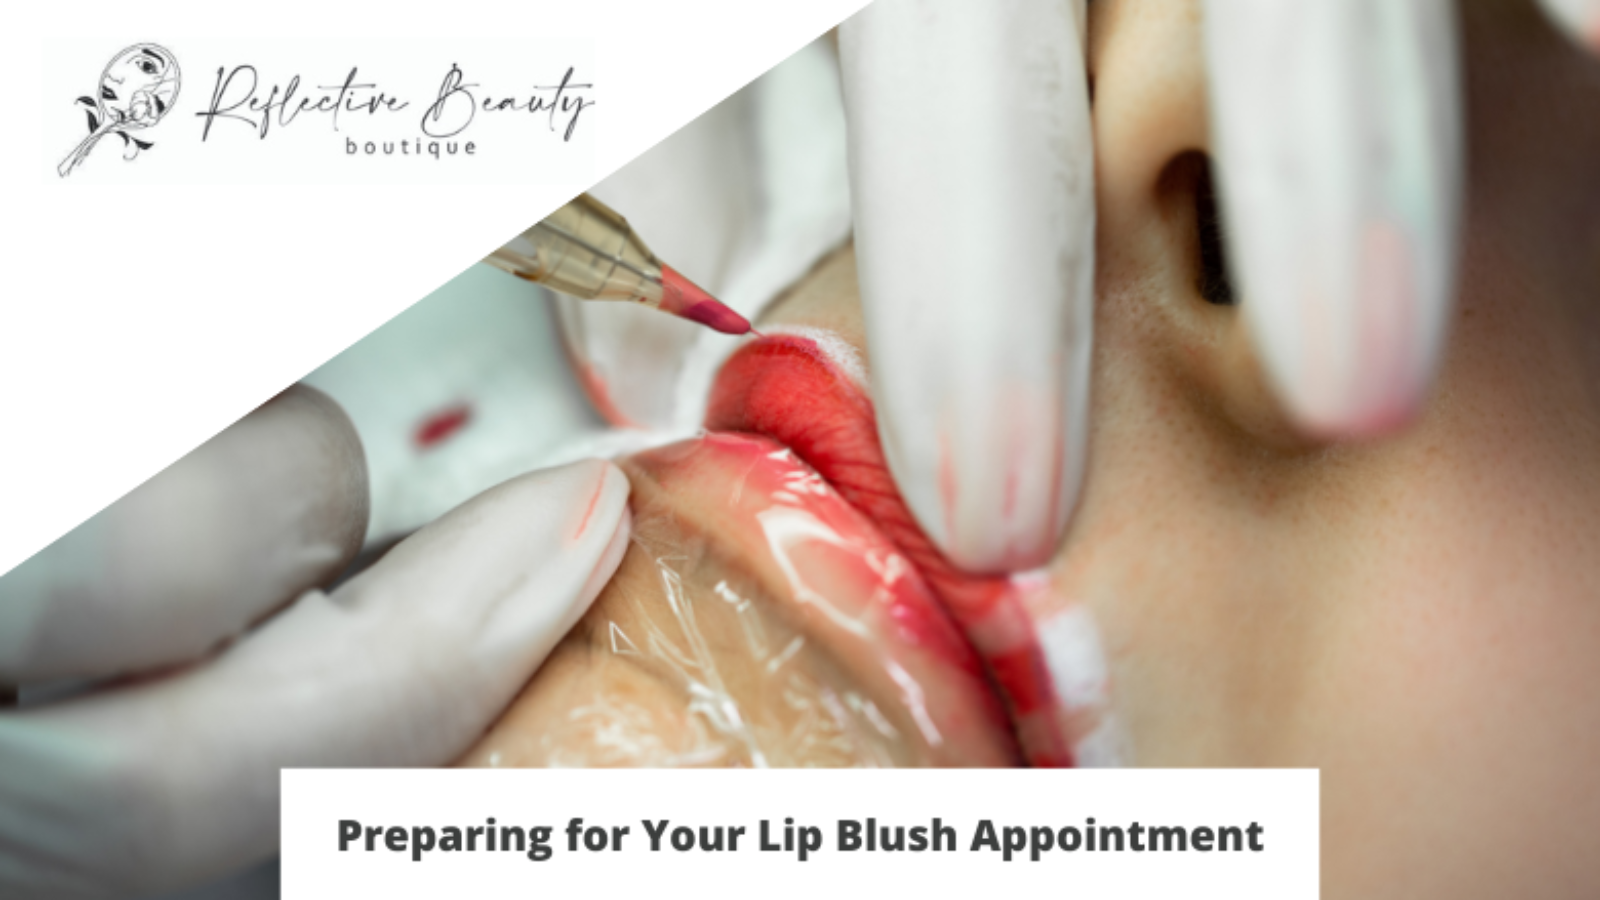 Preparing for Your Lip Blush Appointment